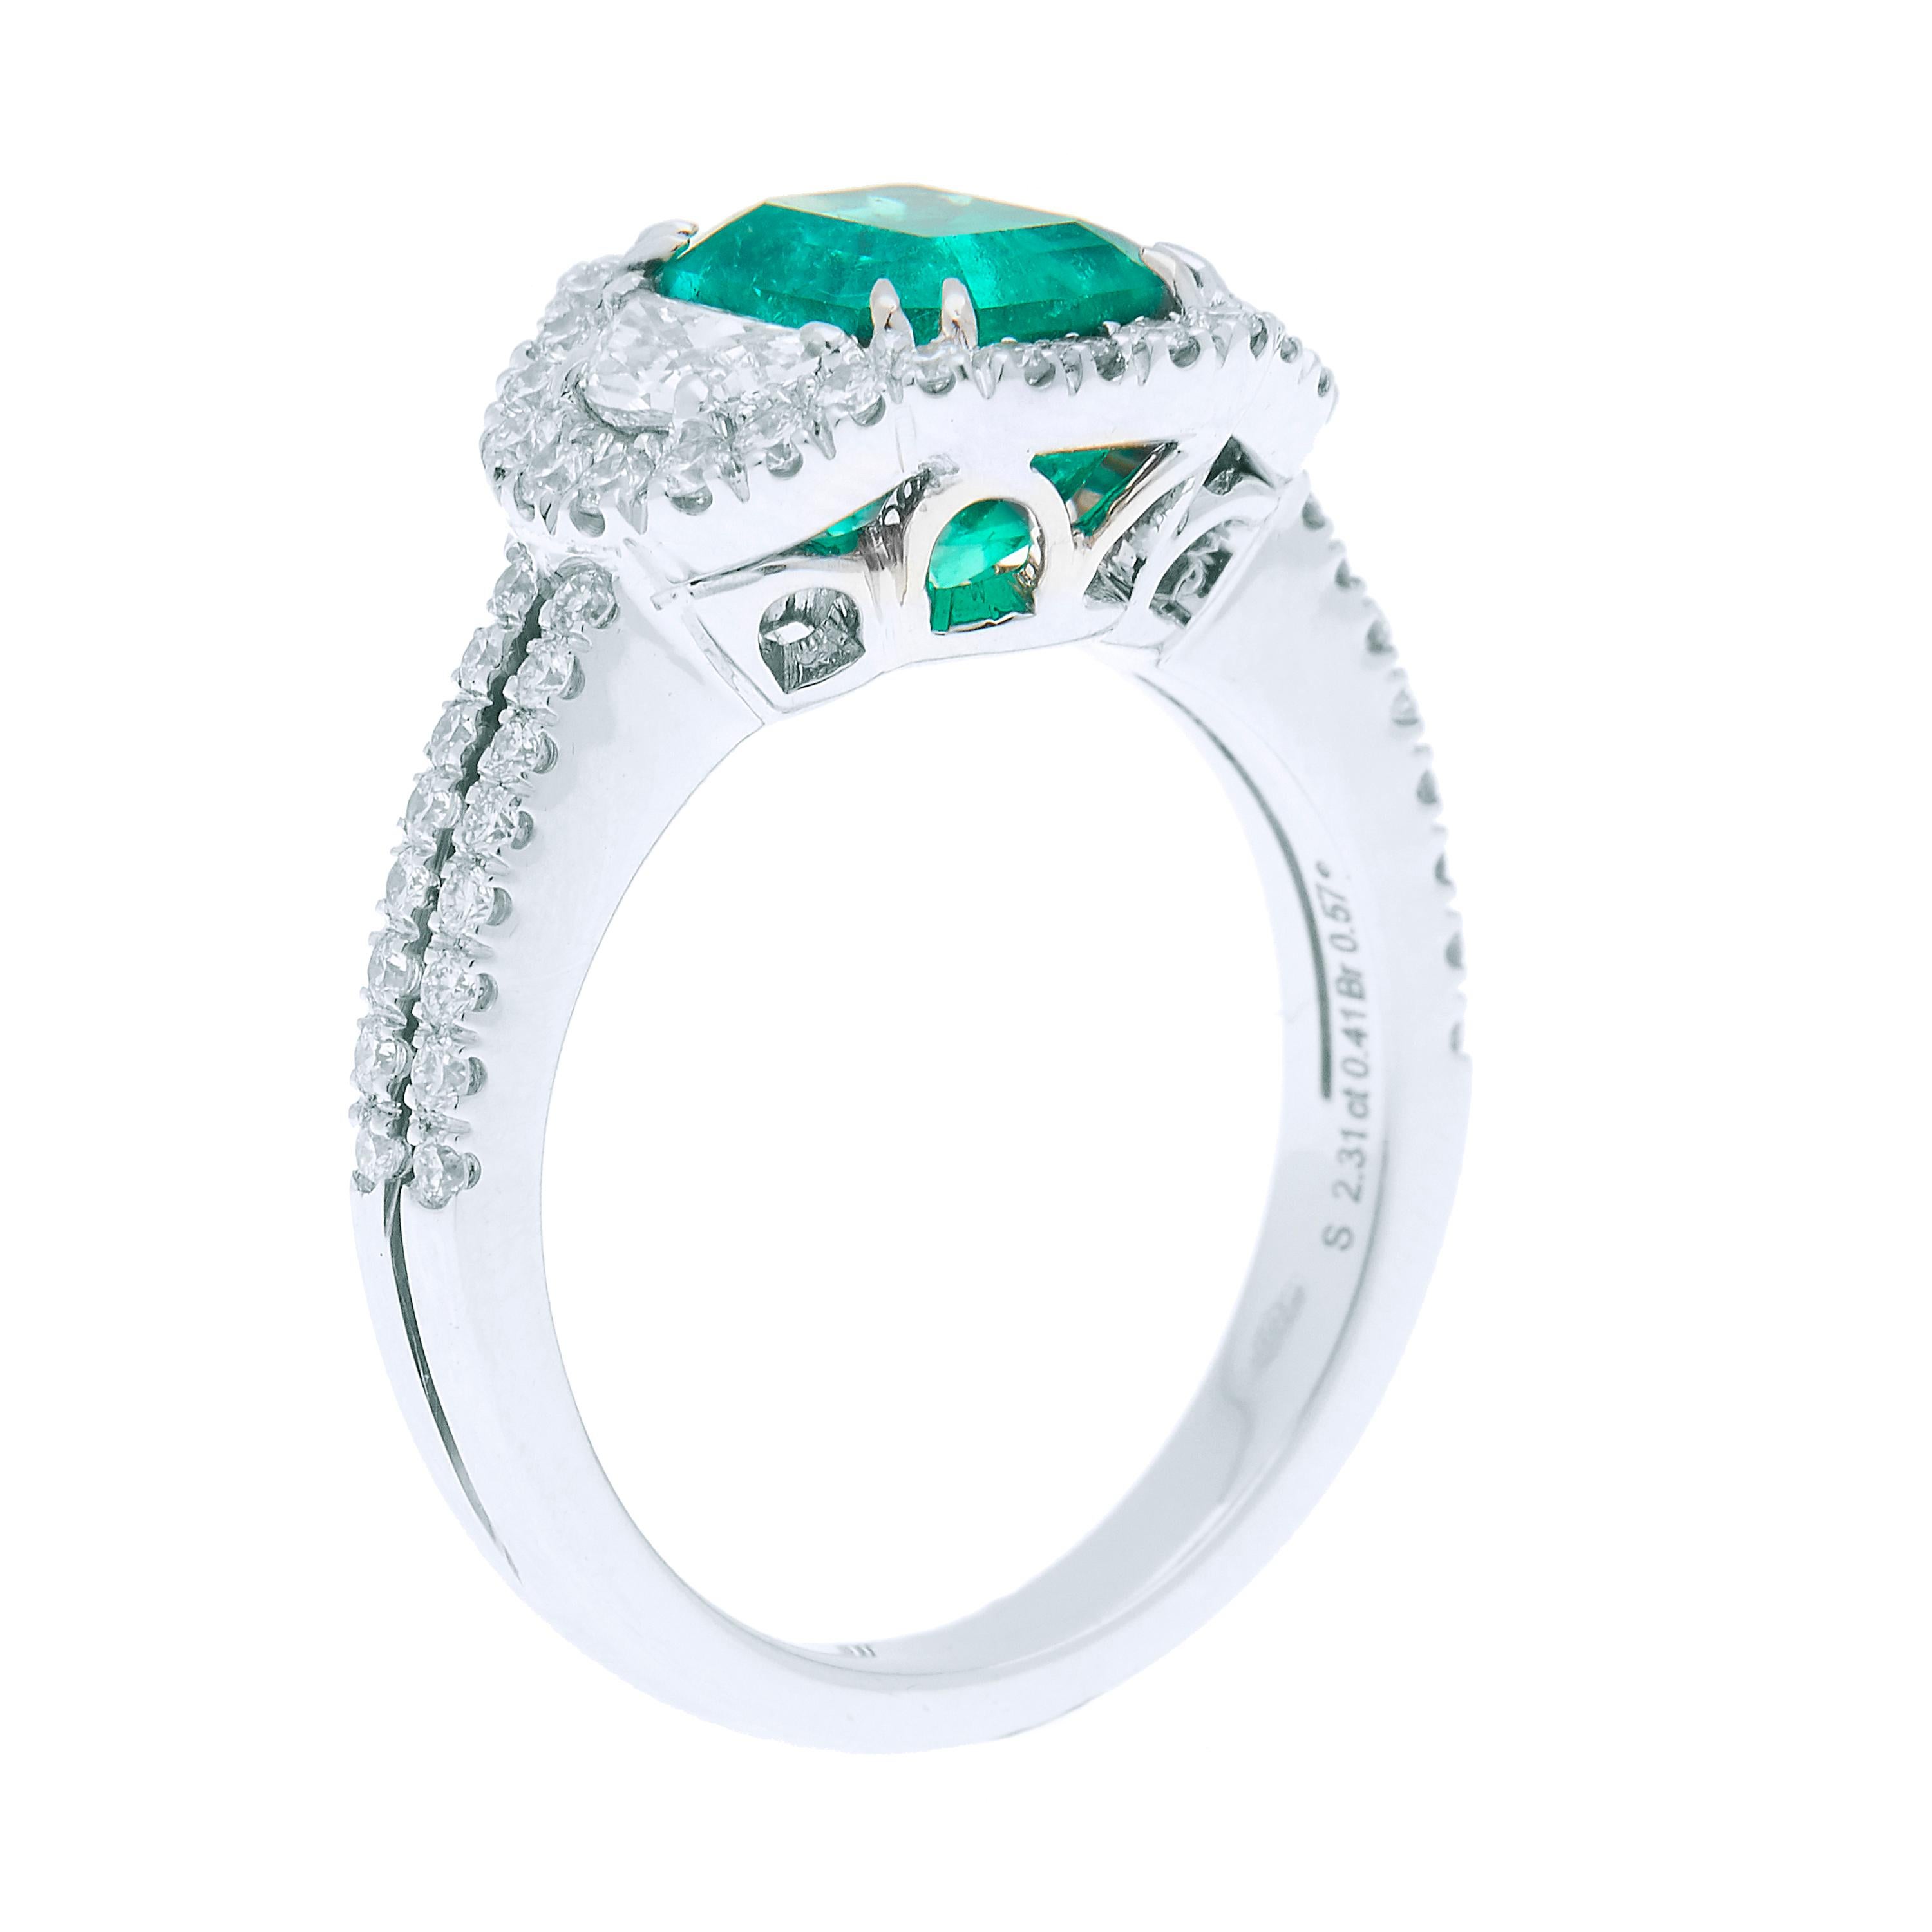 18kt White Gold Emerald Ring with 2.31ct Emerald and Diamond Accents In New Condition For Sale In Toronto, CA